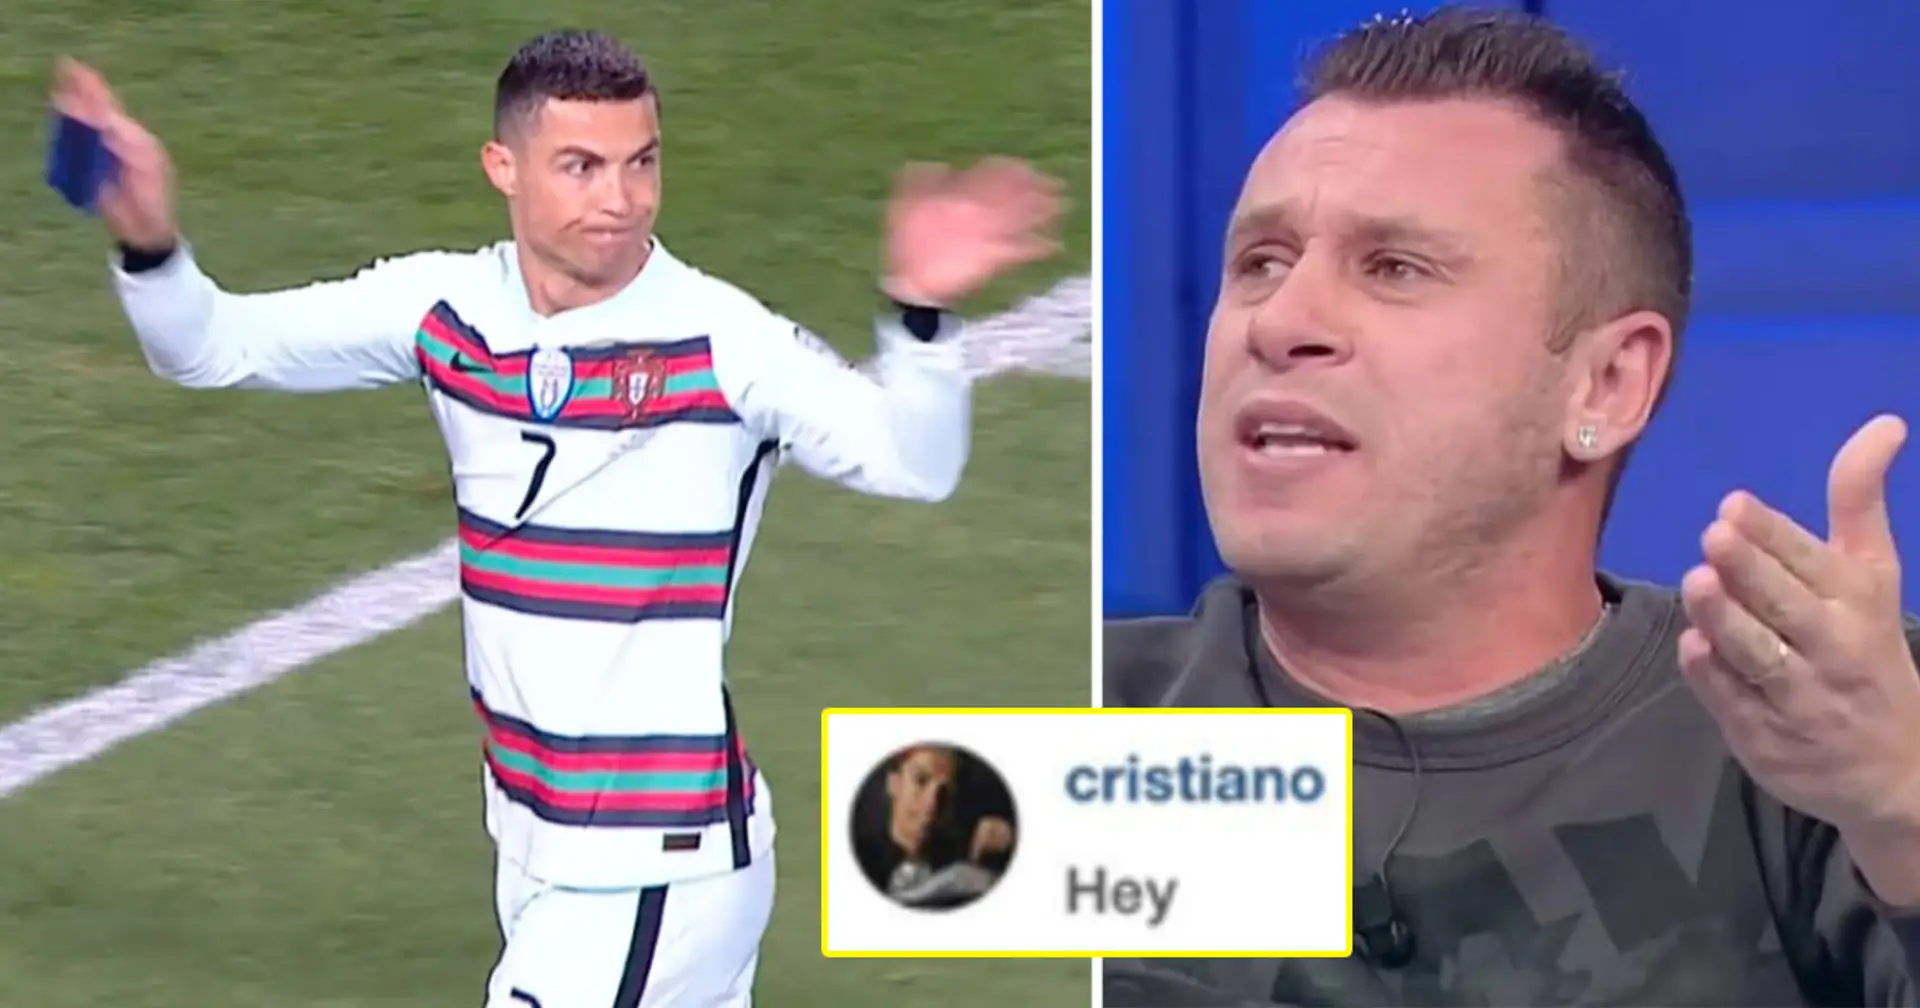 'I'd just say, be like Messi': Cassano reveals Ronaldo wrote him angry messages asking for respect